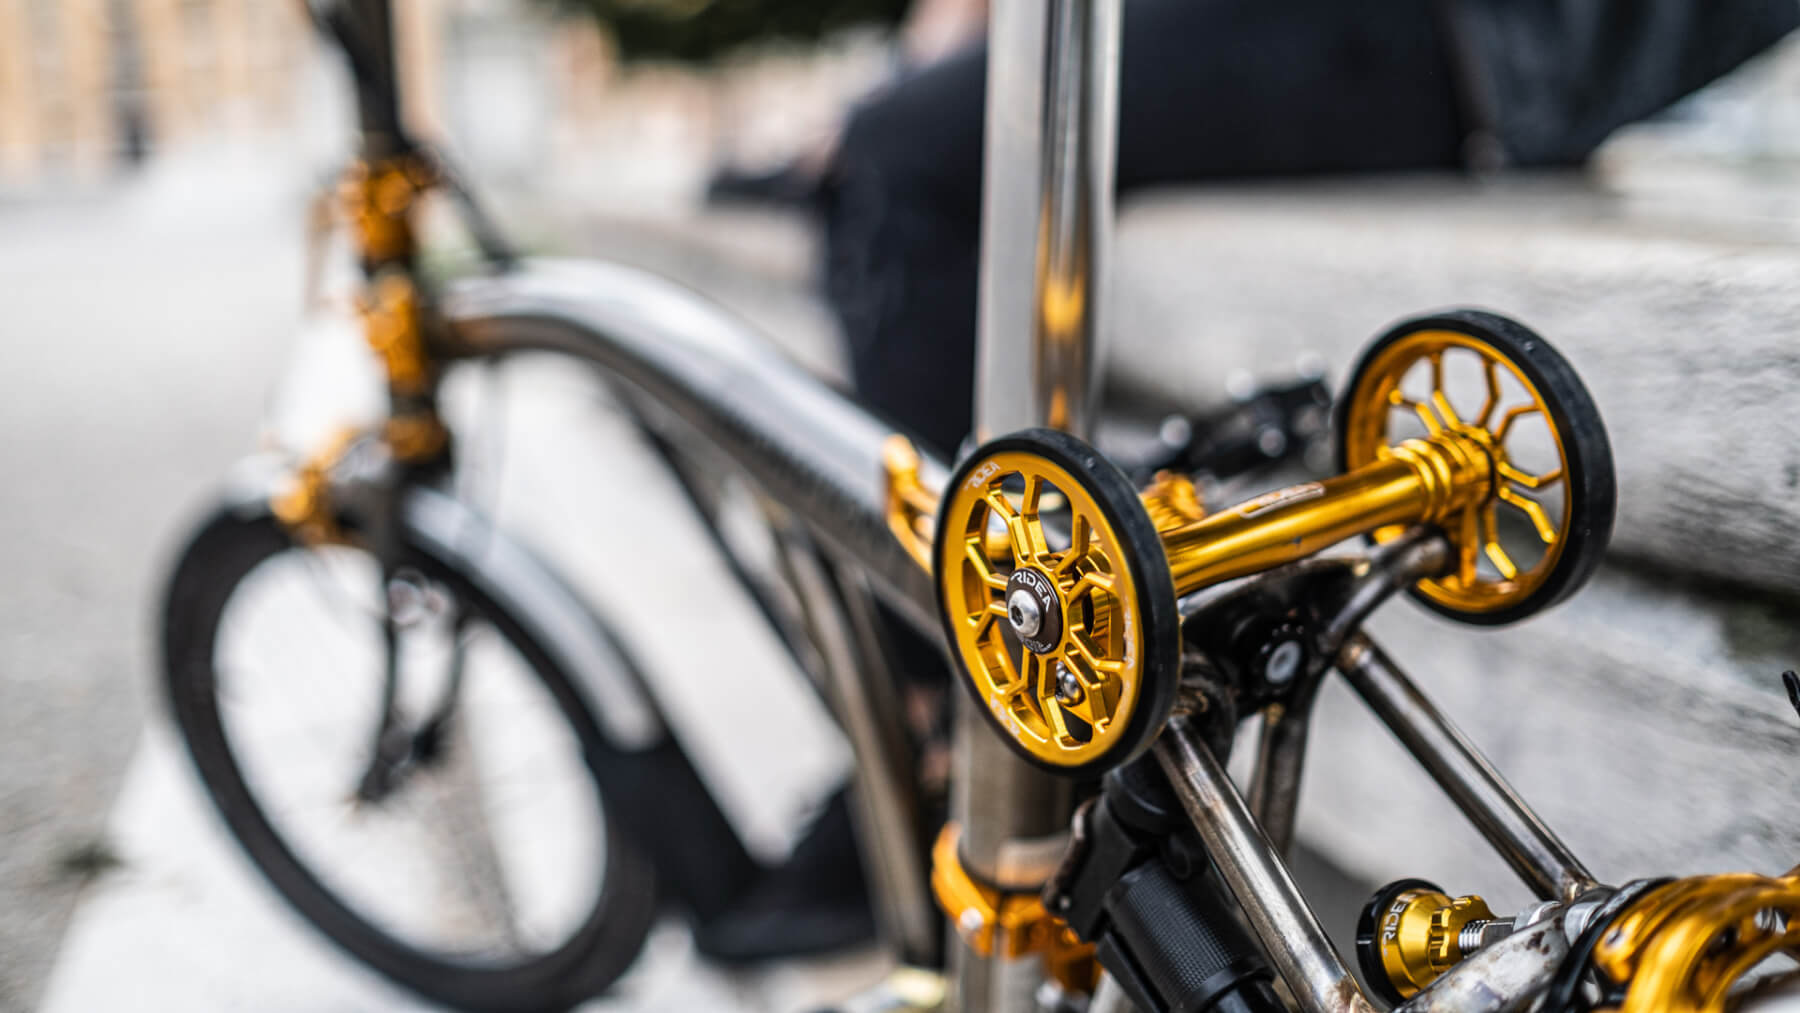 Eazy wheels for Brompton